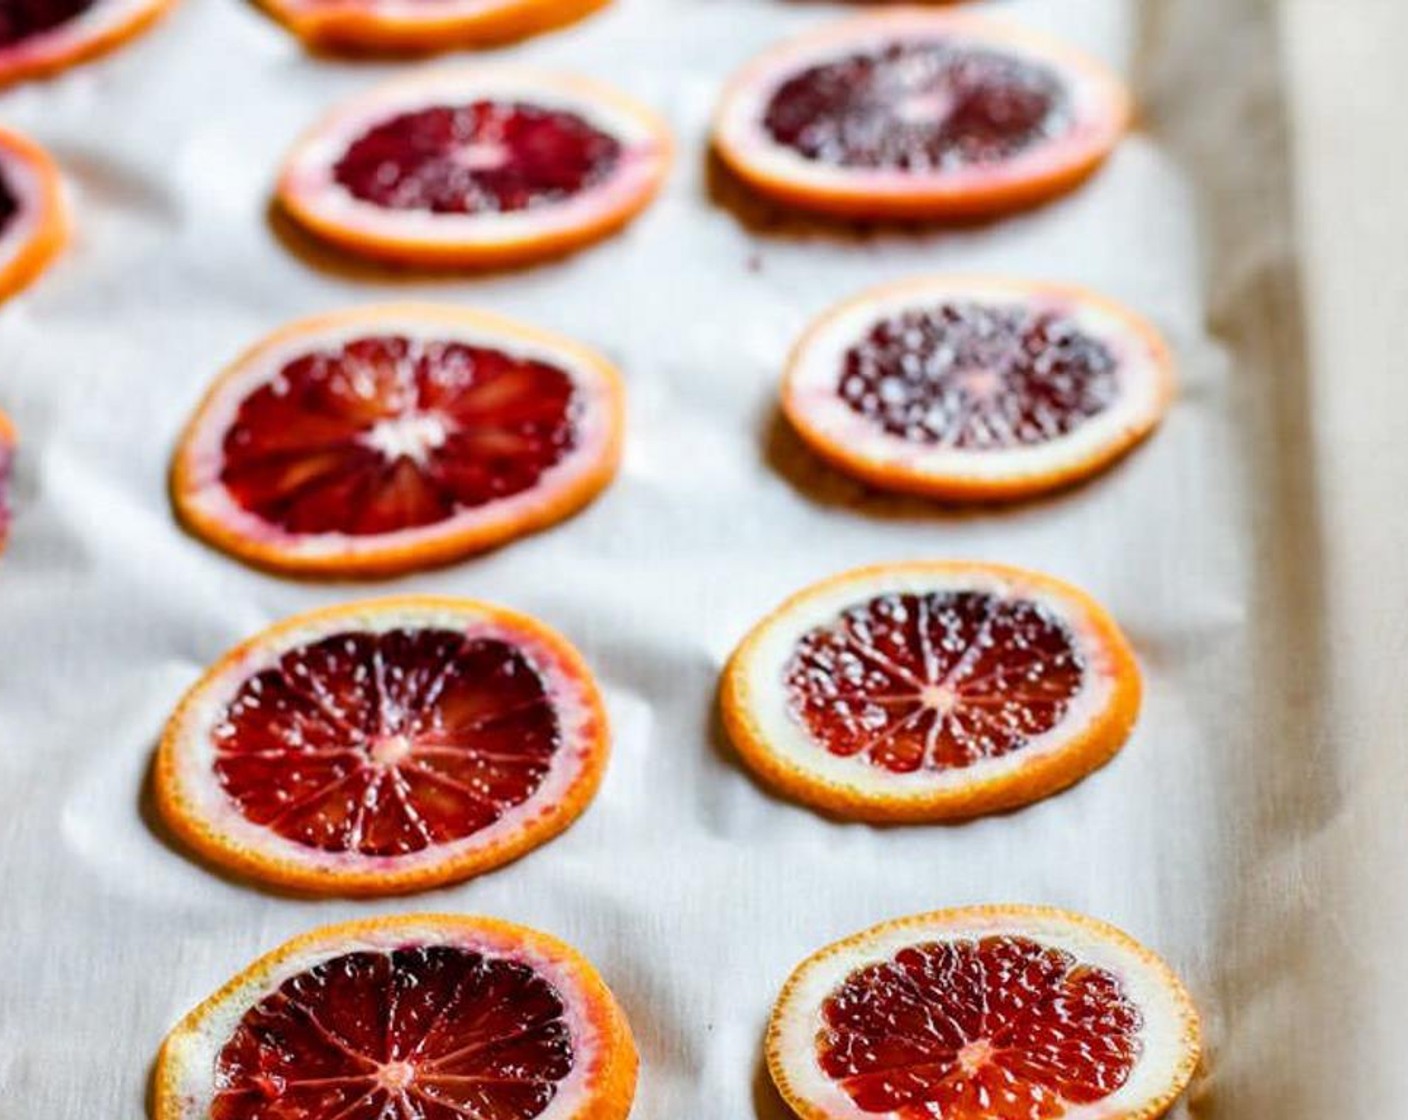 step 1 Preheat oven to 200 degrees F (95 degrees C). Lay the Oranges (2) on a baking sheet, lined with parchment paper.